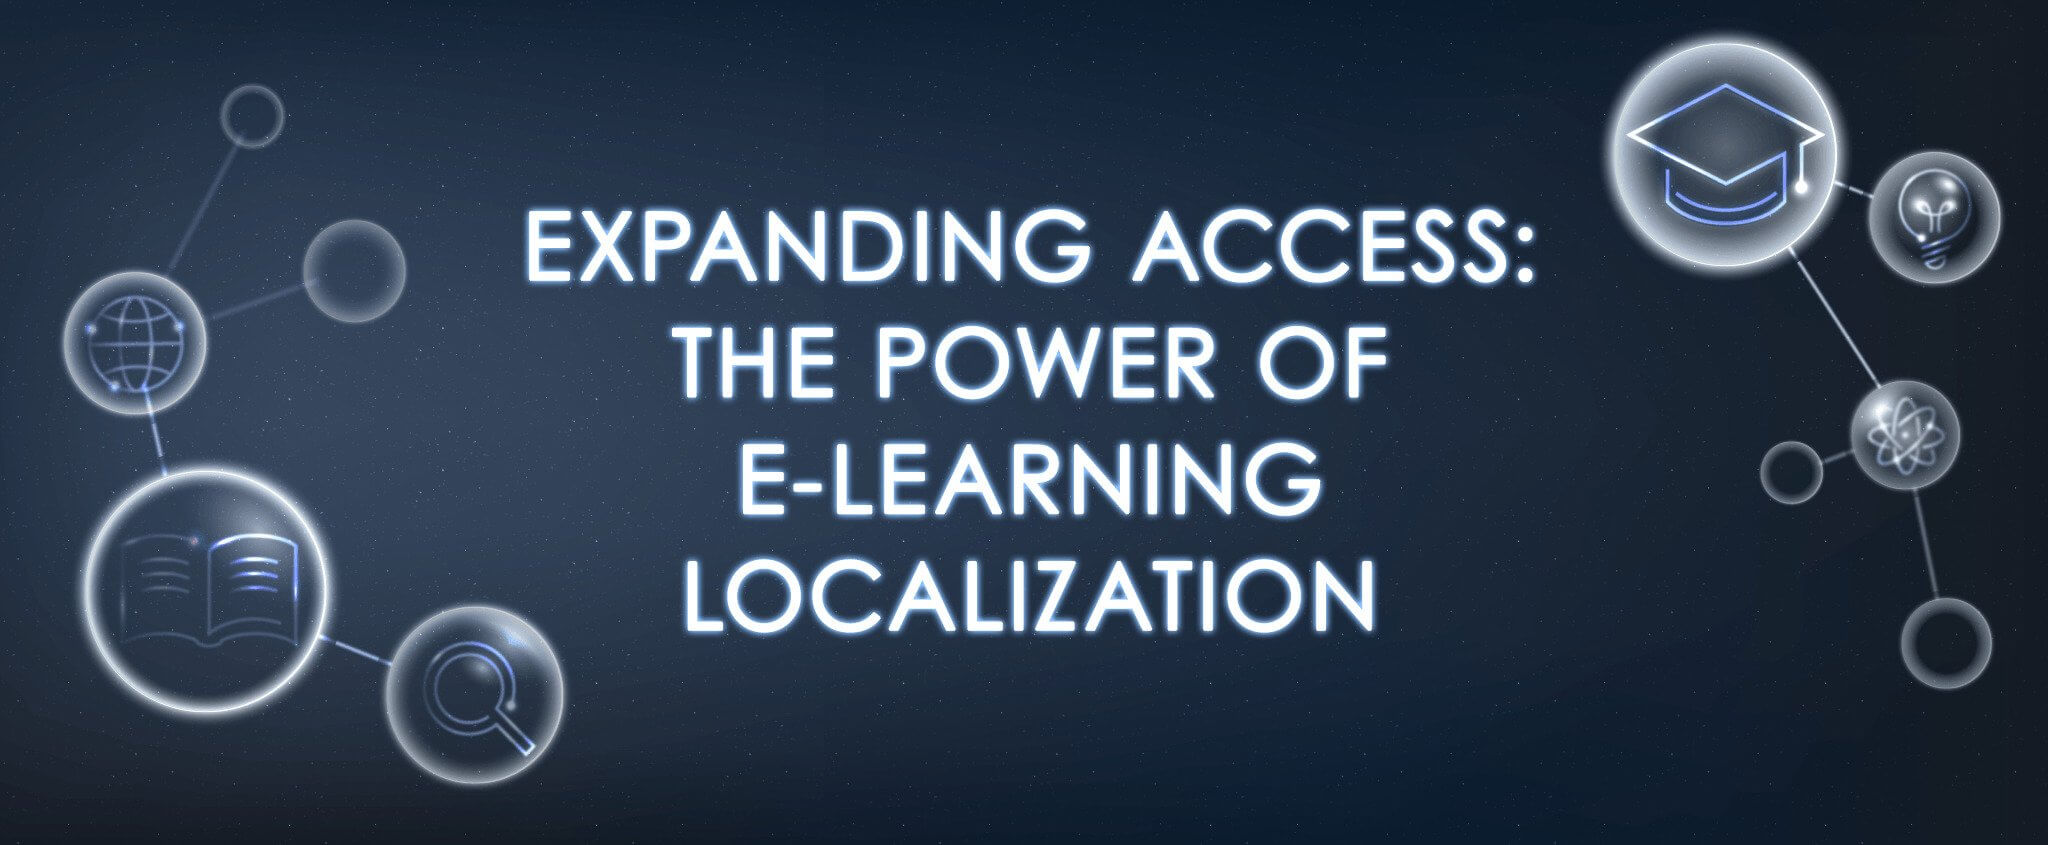 Expanding Access: The Power of E-Learning Localization